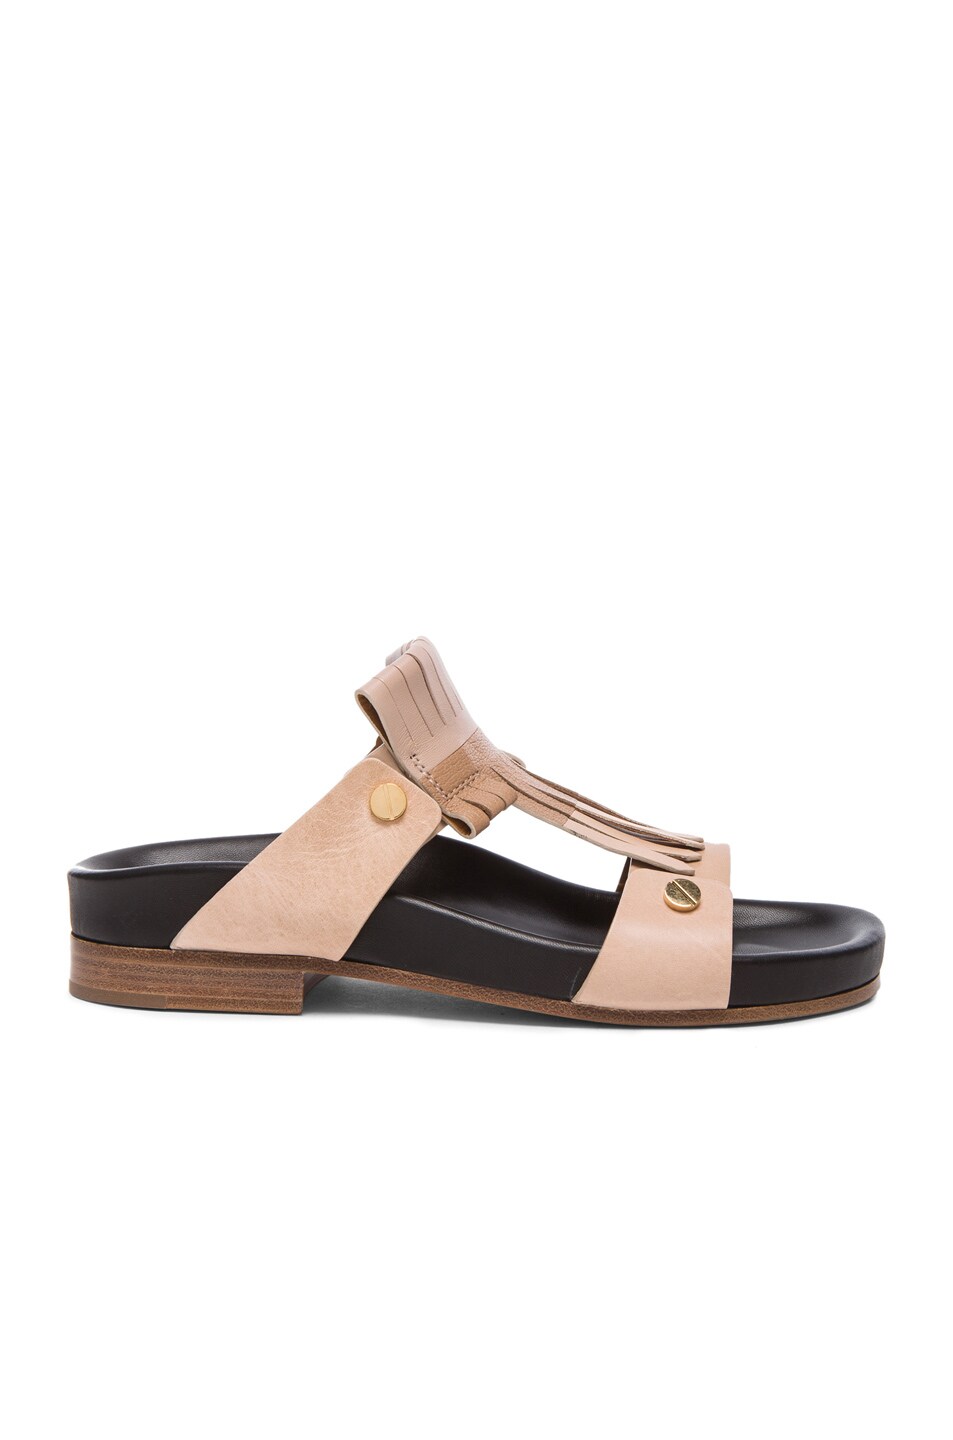 Image 1 of Chloe Fringe Leather Sandals in Nude